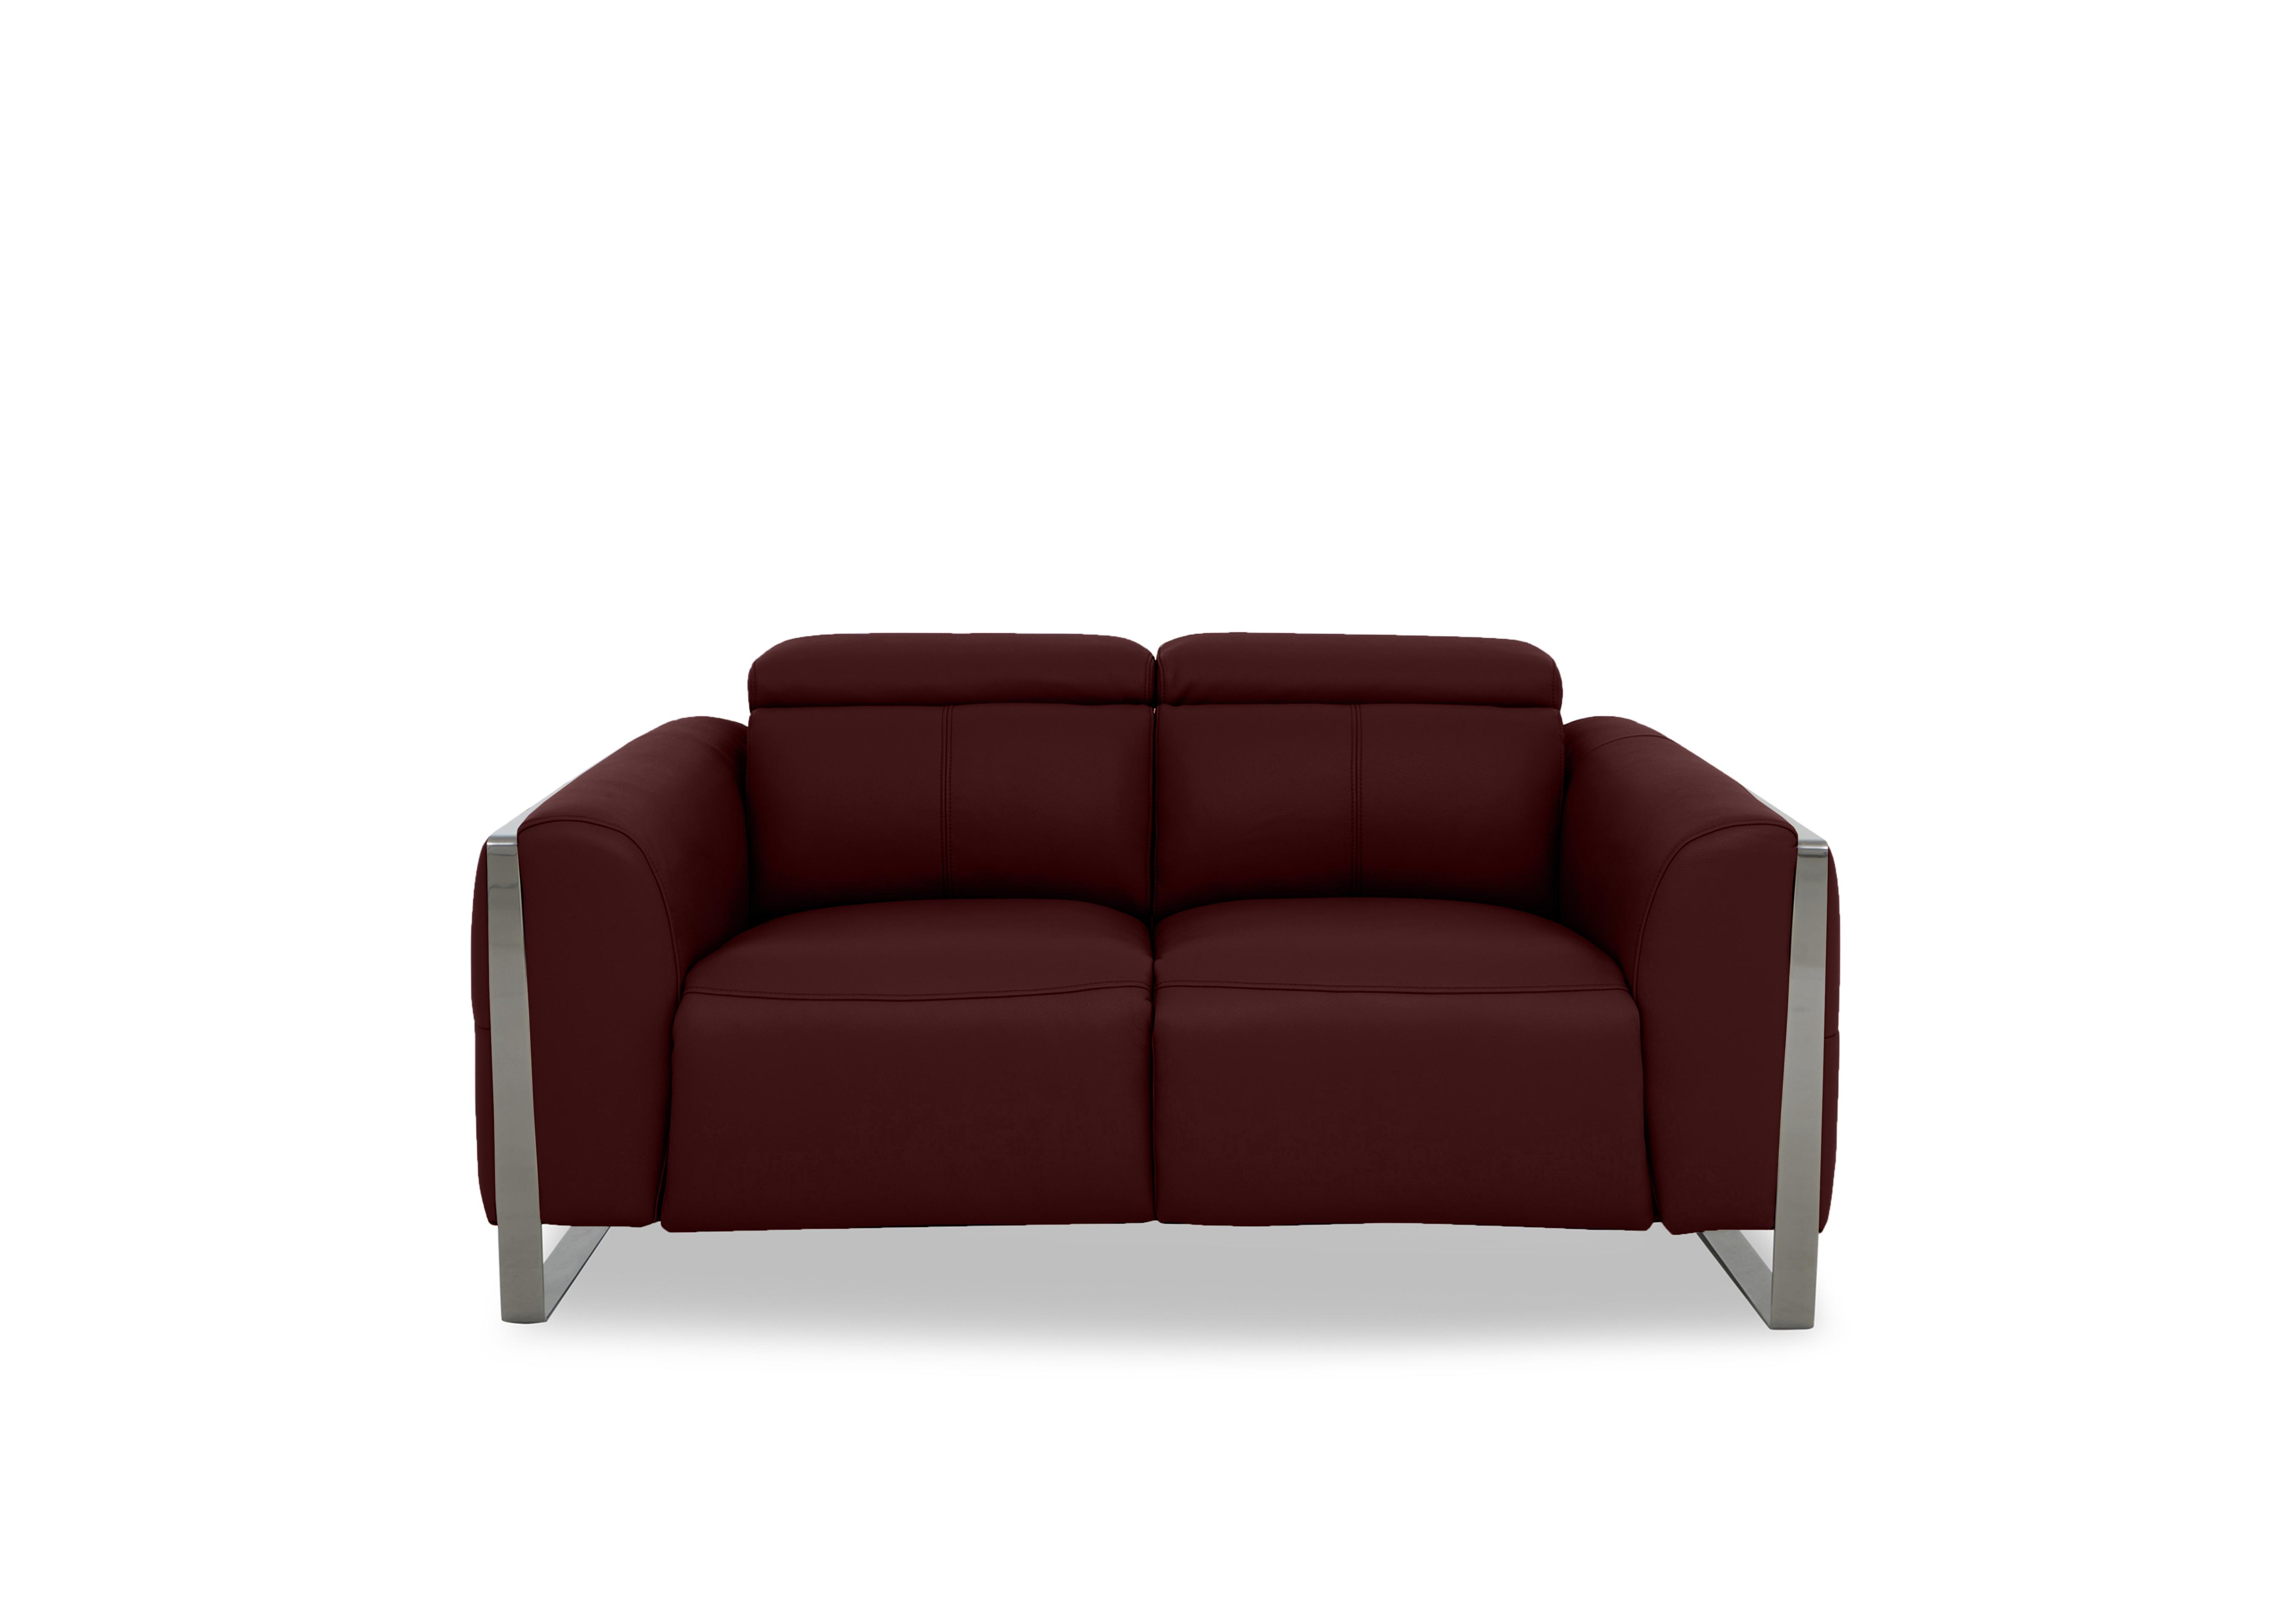 Gisella Leather 2 Seater Sofa in Cat-60/15 Ruby on Furniture Village